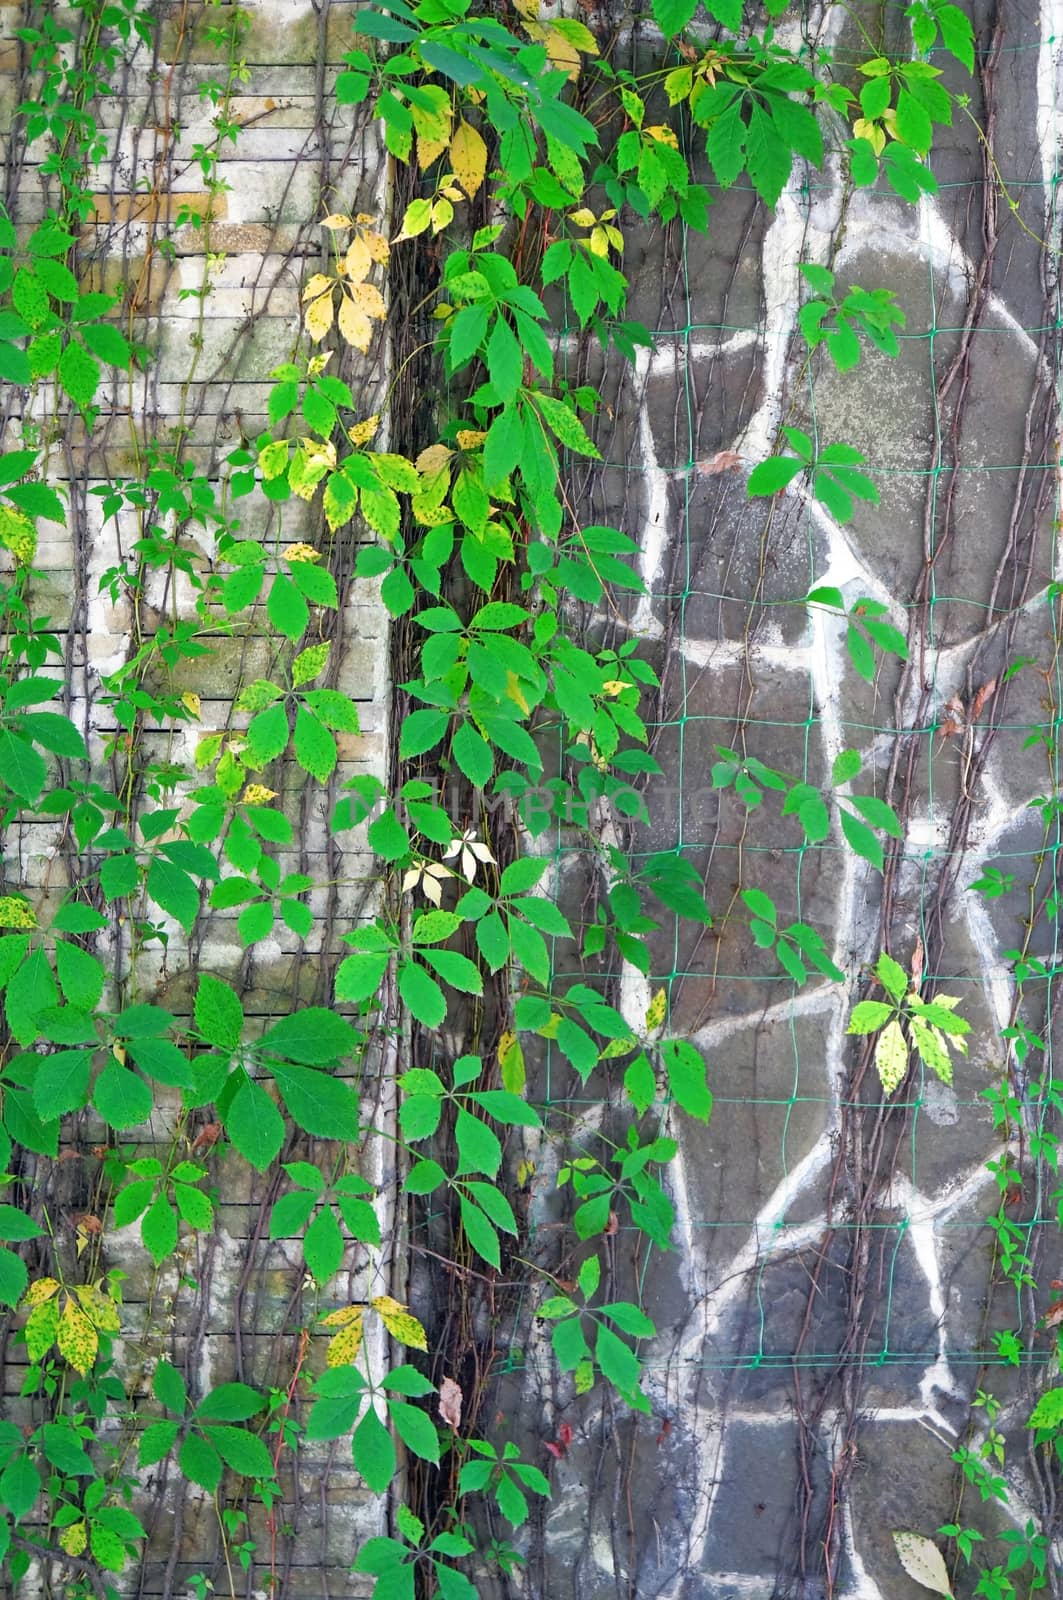 The wall of gray stones overgrown with Parthenocissus                               